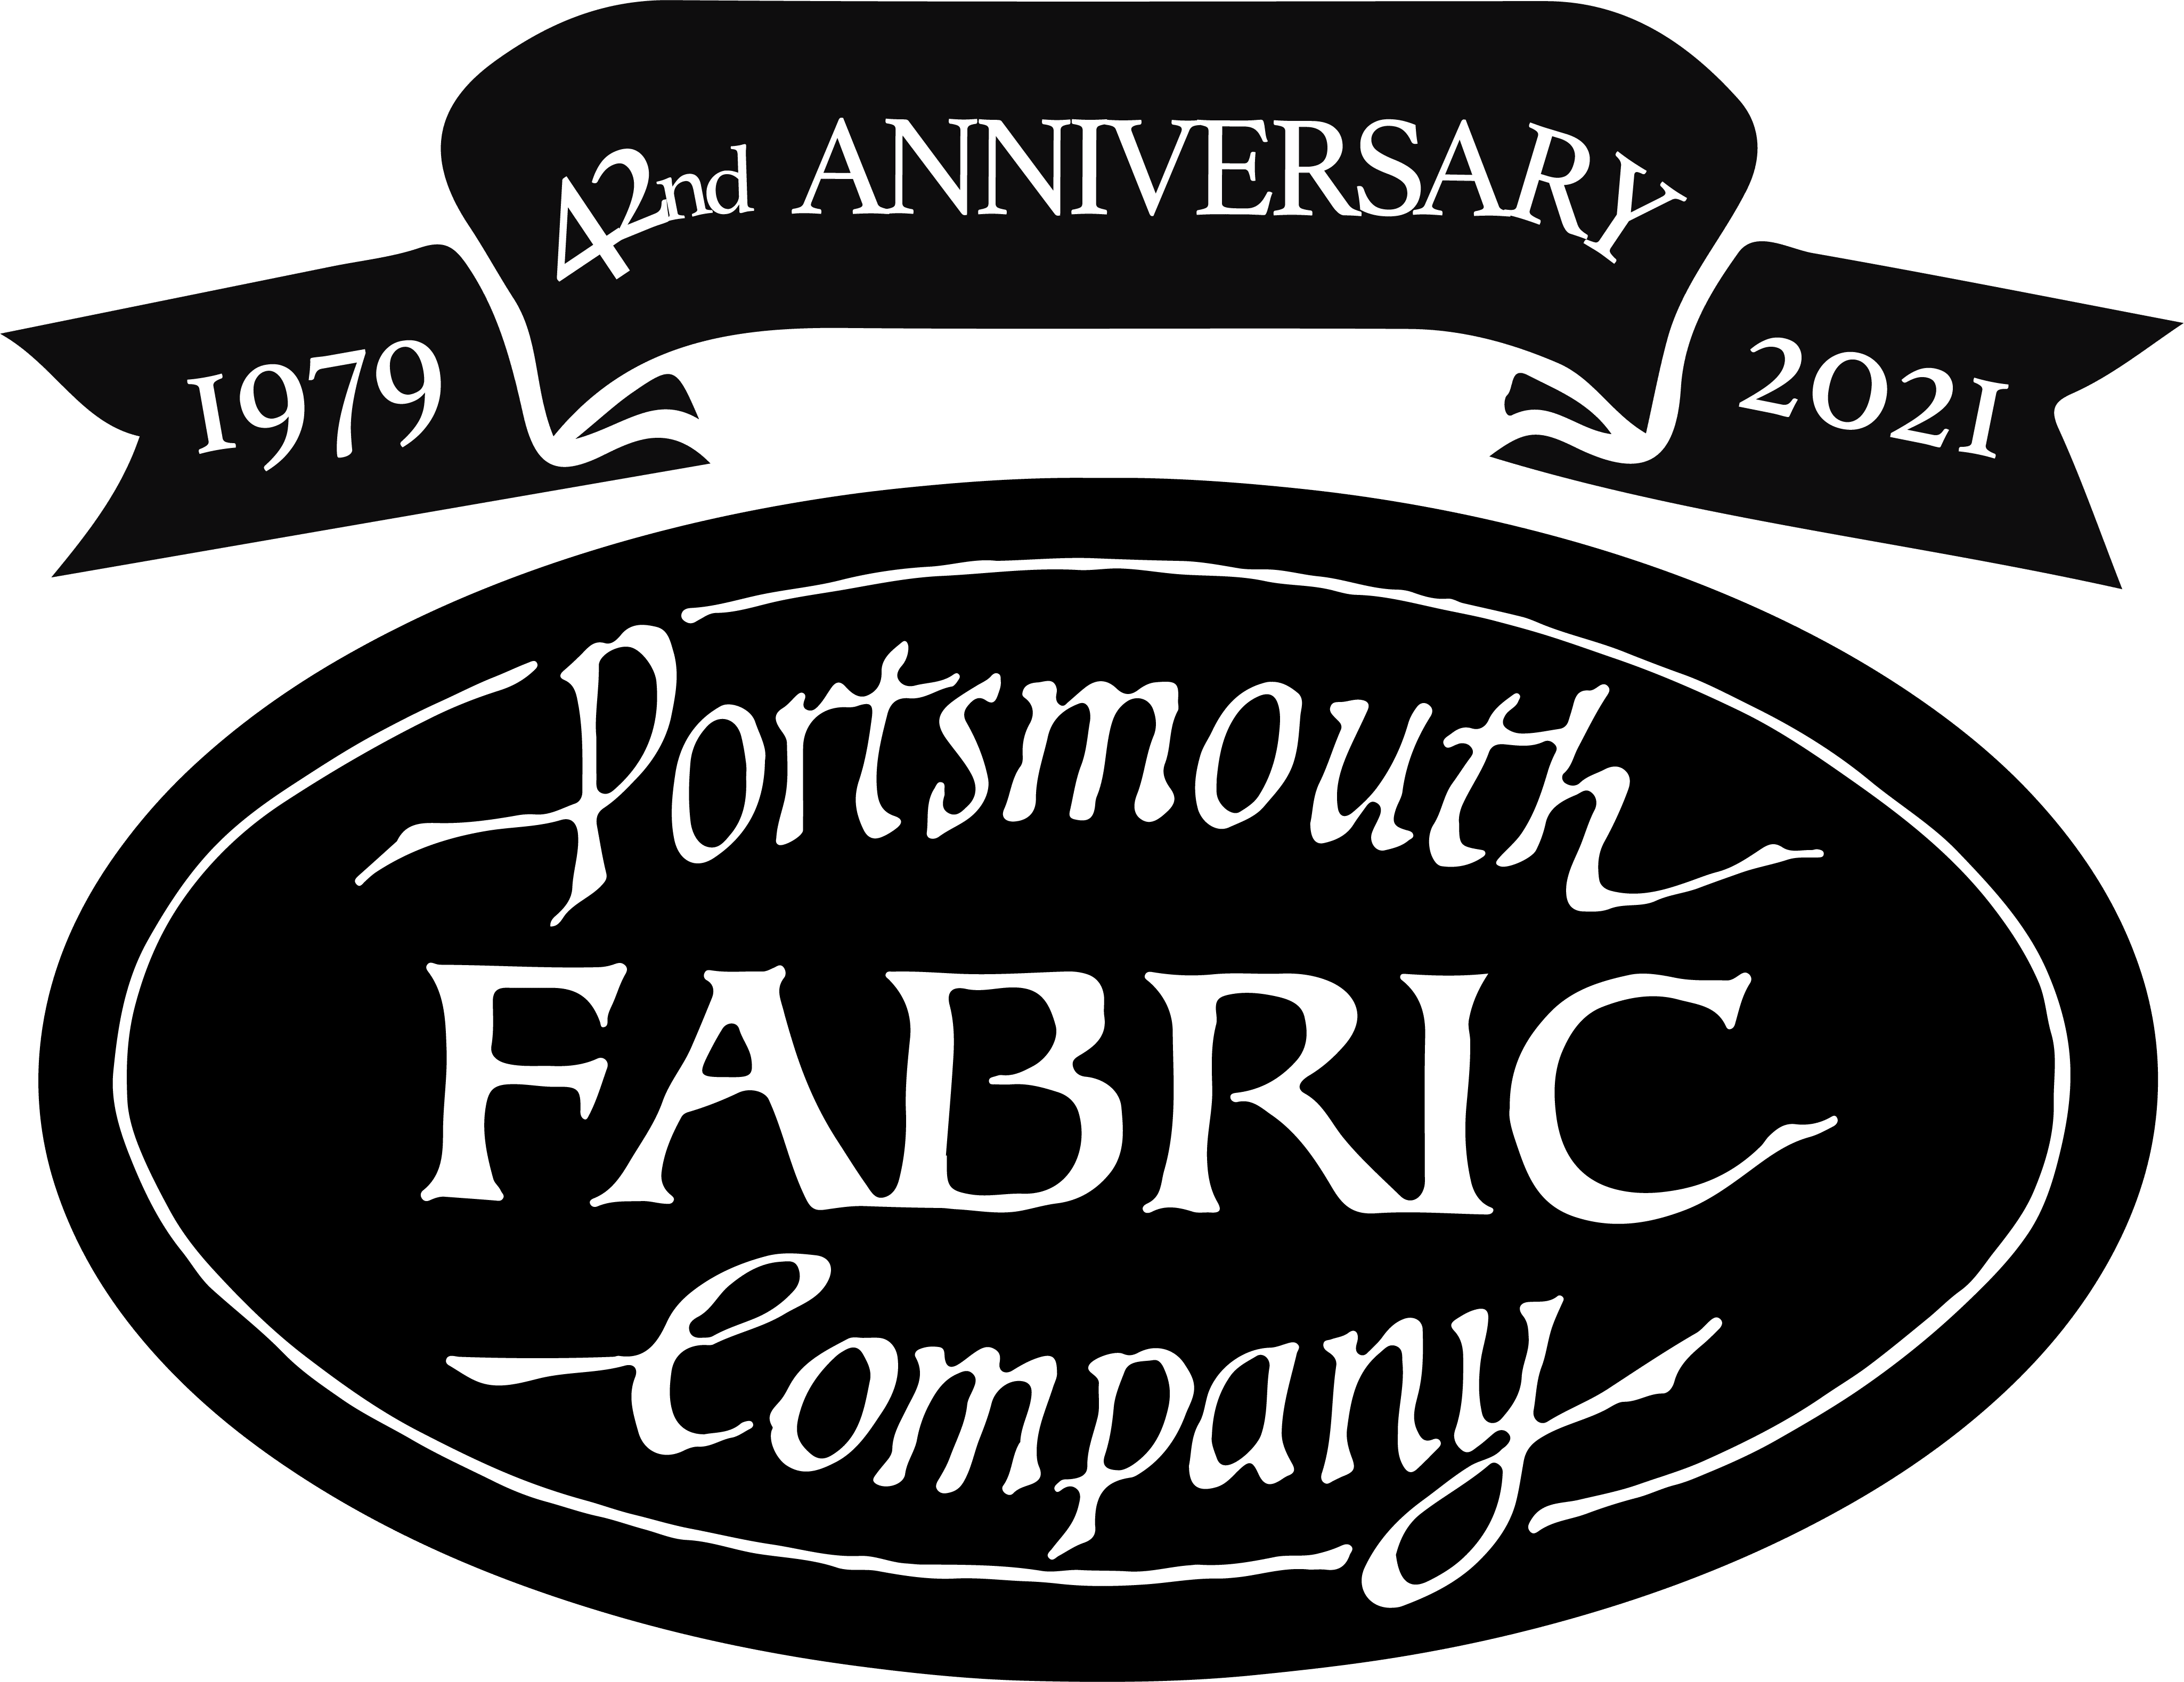 Portsmouth Fabric